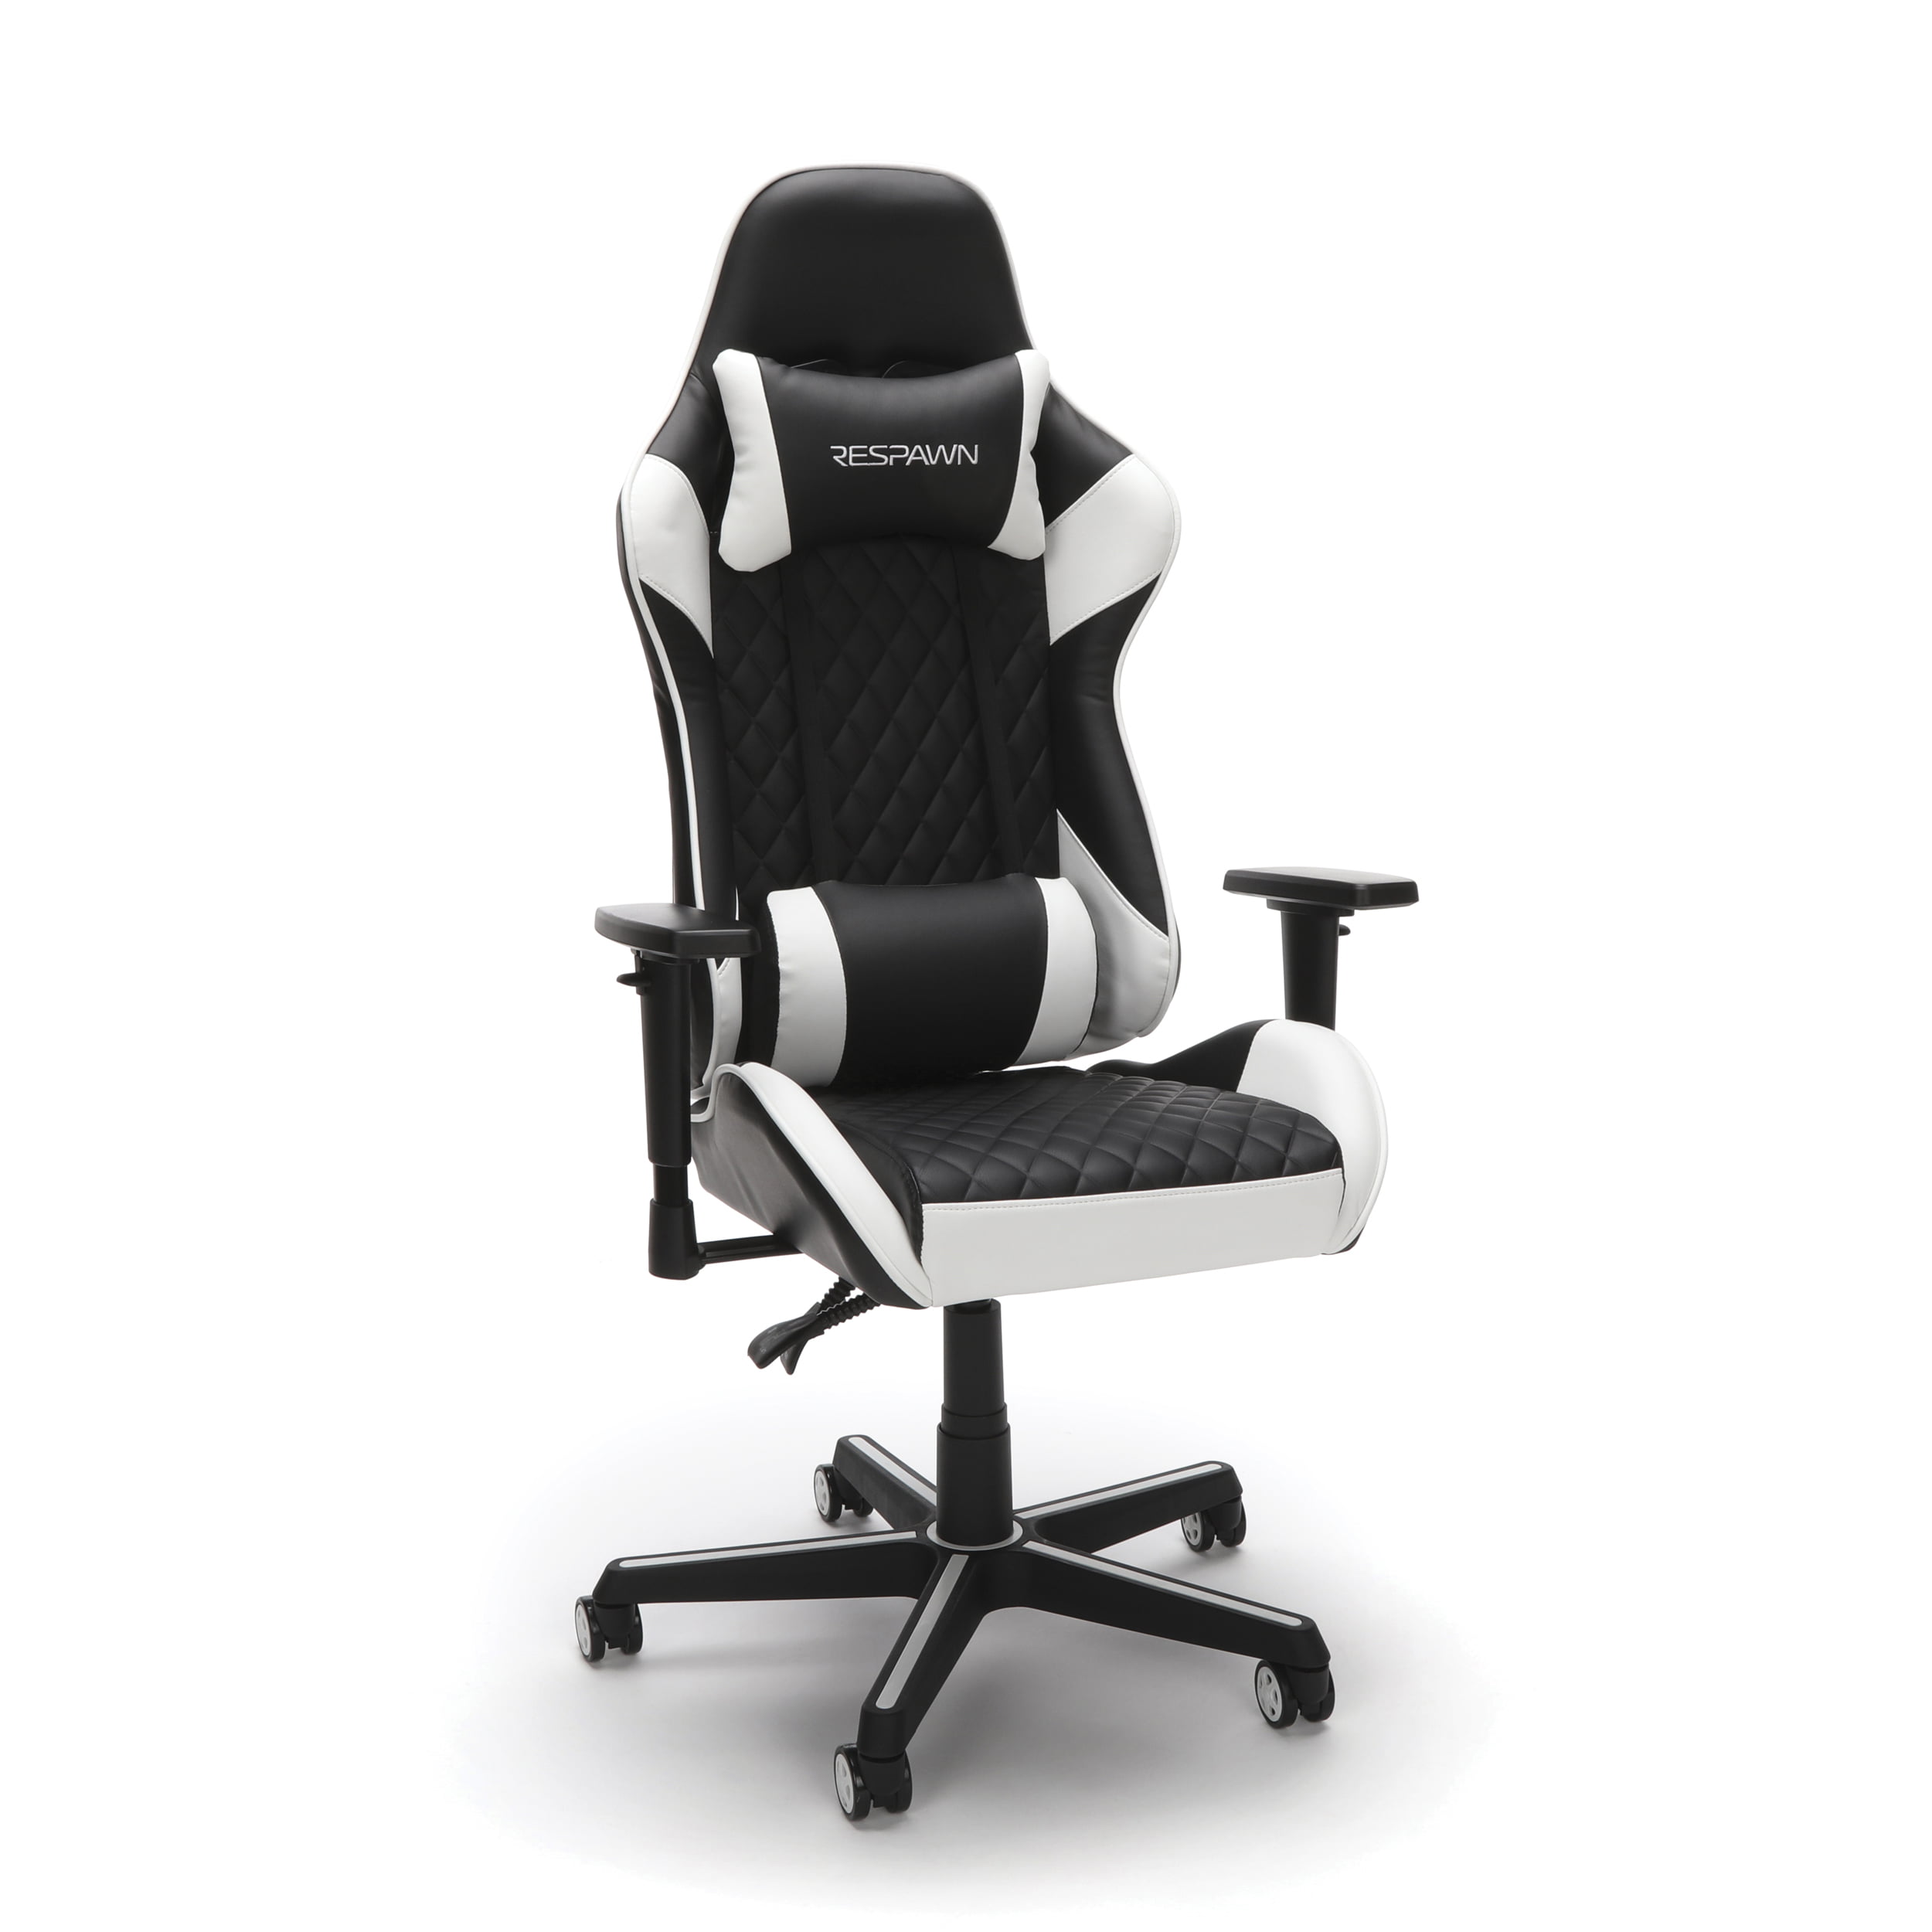 RESPAWN-100 Racing Style Gaming Chair - Reclining Ergonomic Leather